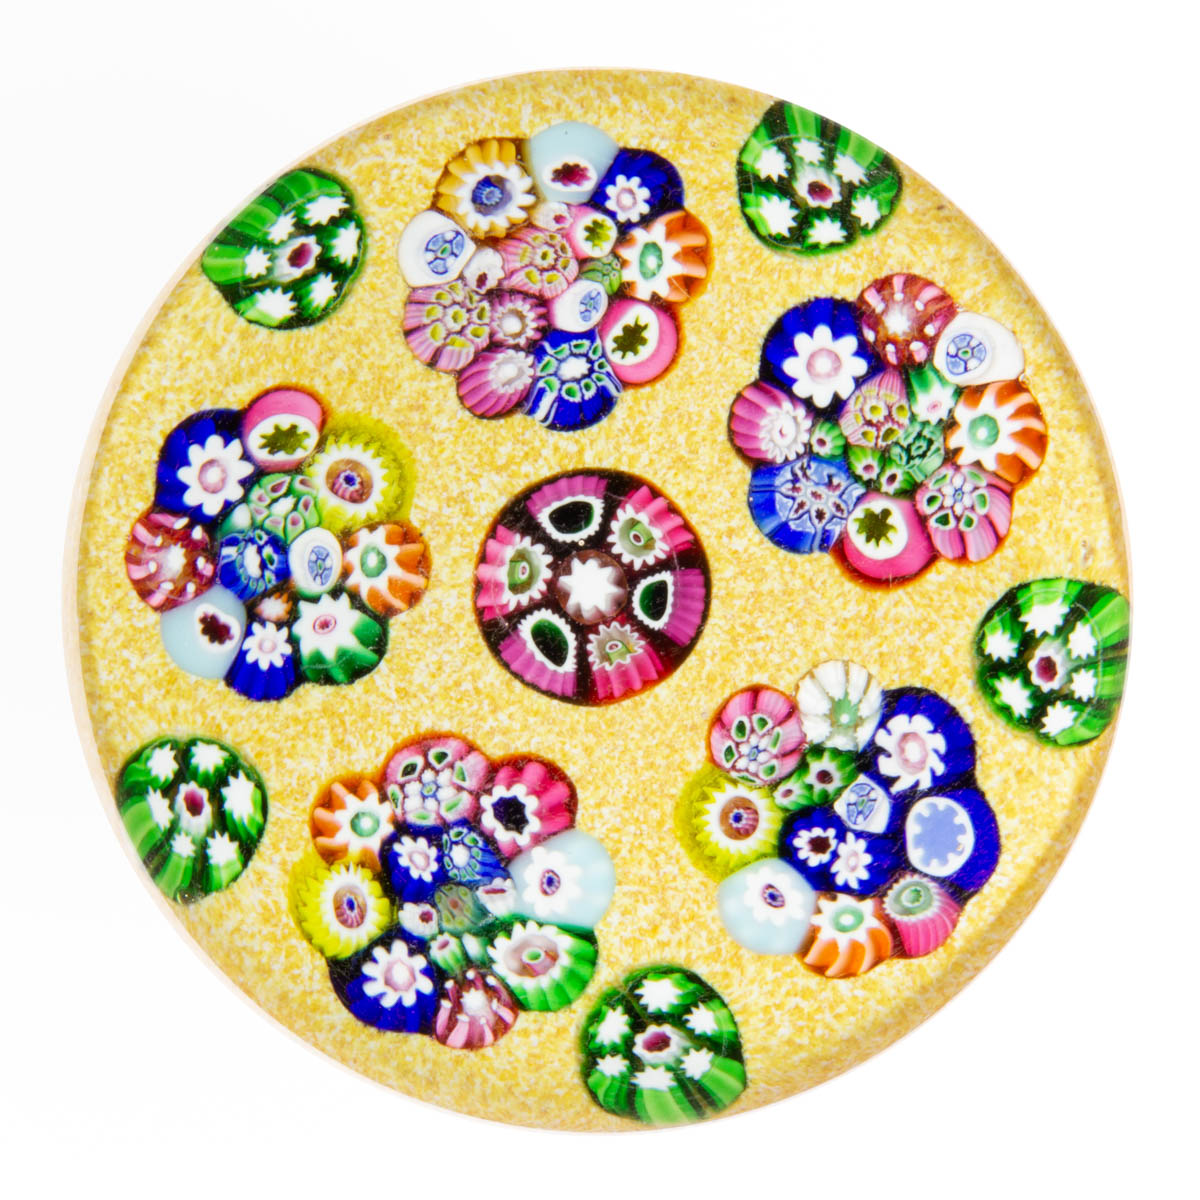 EARLY PAUL YSART (SCOTTISH, 1904-1979) ATTRIBUTED SPACED MILLEFIORI ART GLASS PAPERWEIGHT